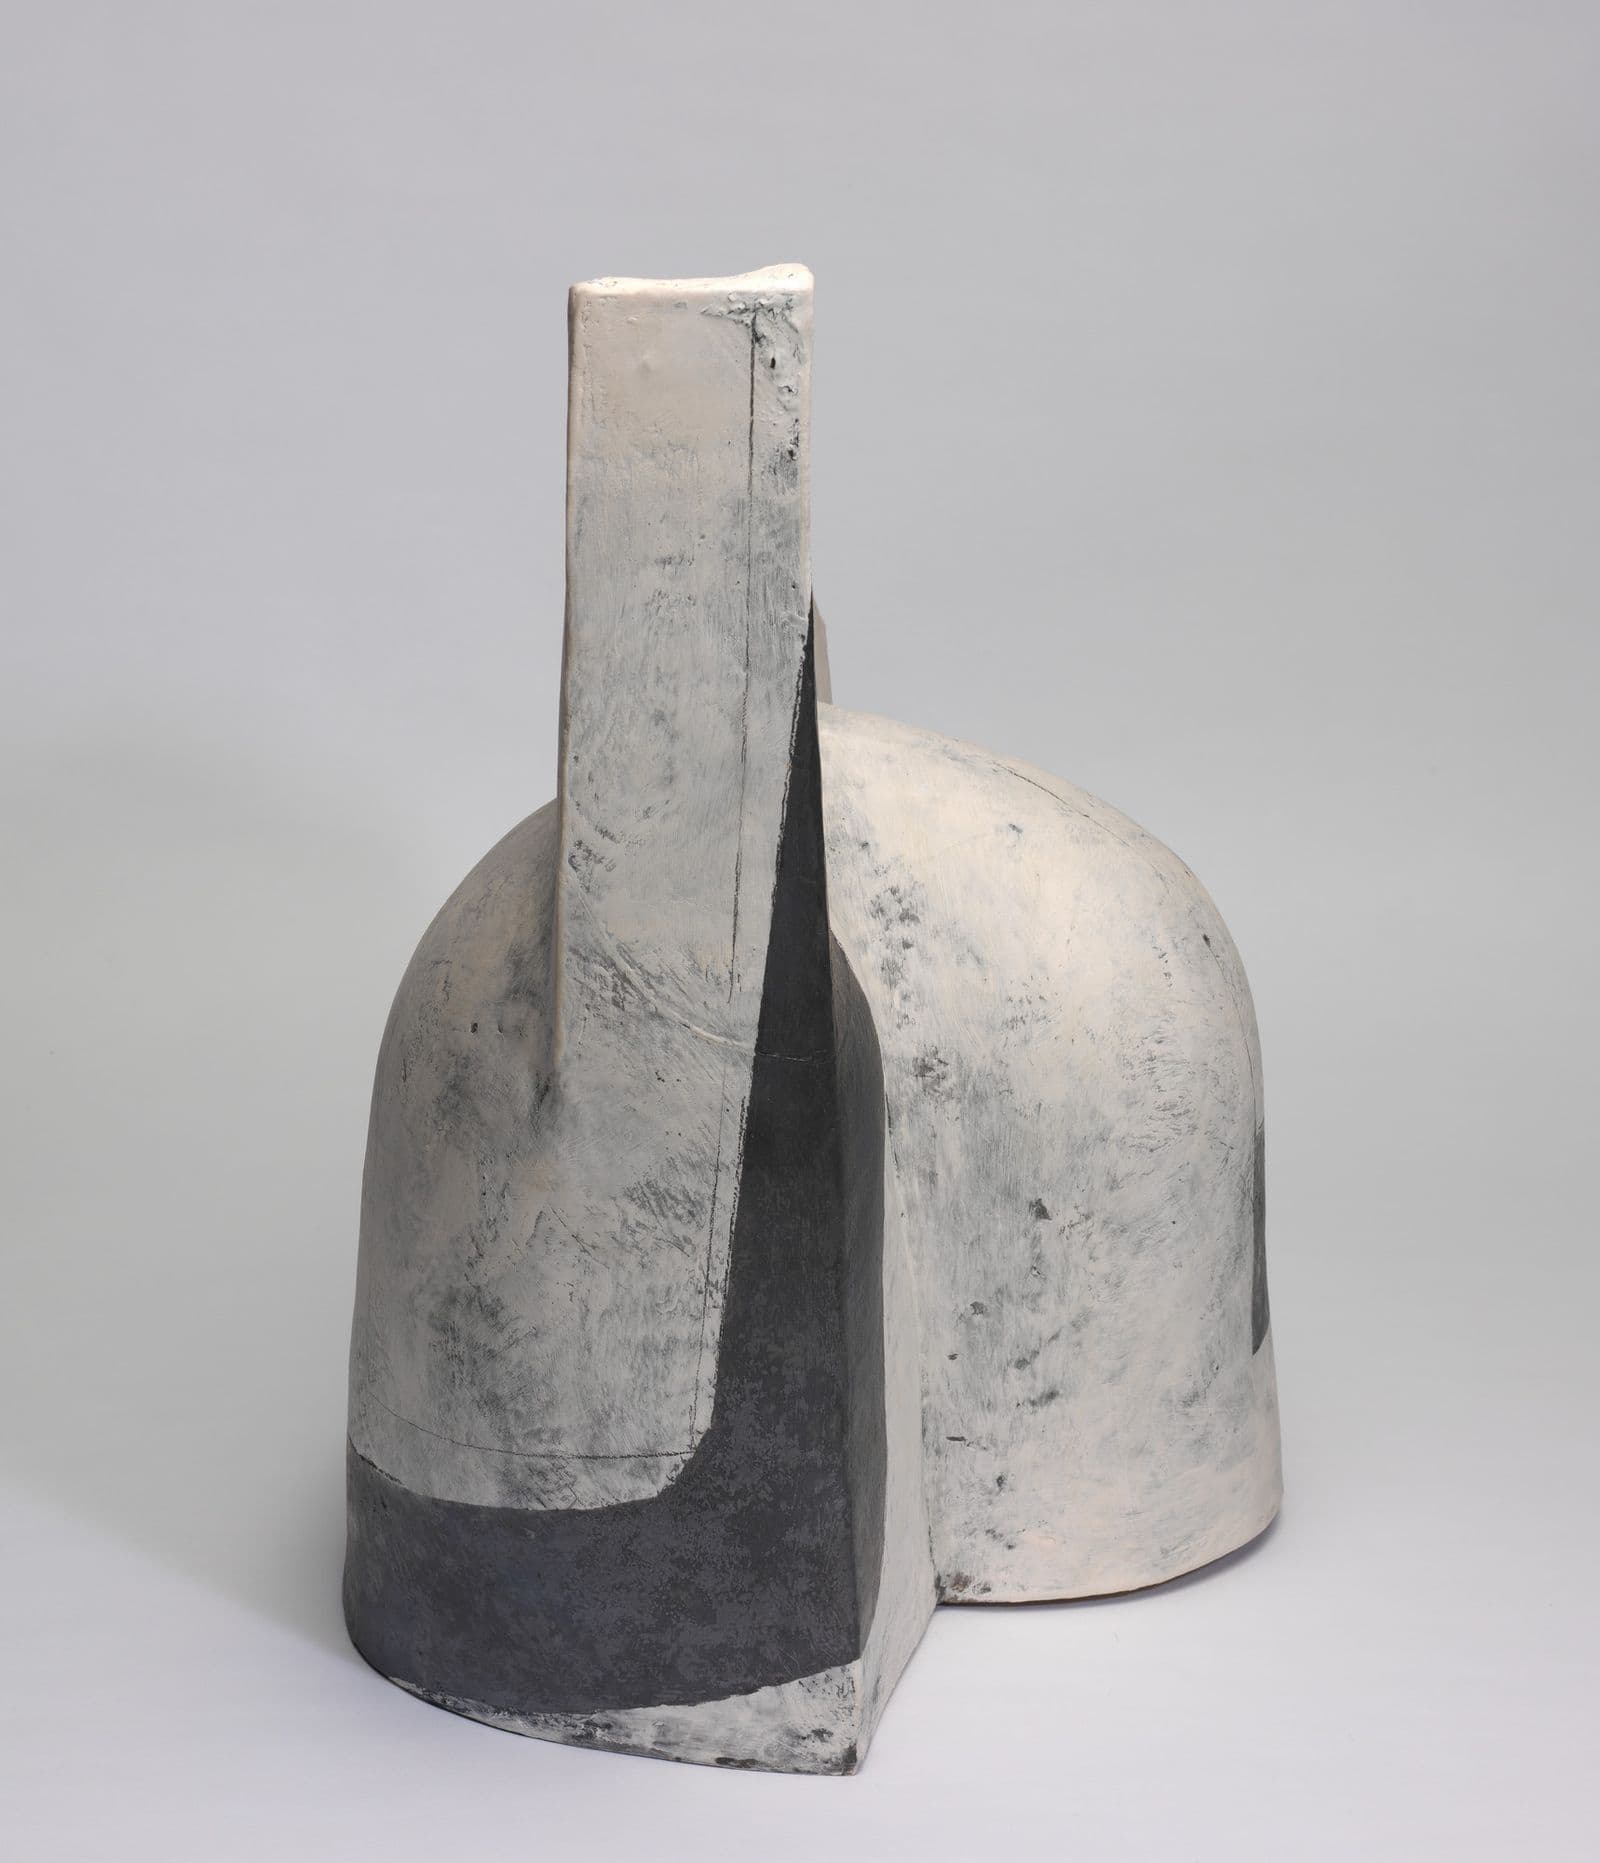 Abstract black and white sculpture with mottled texture